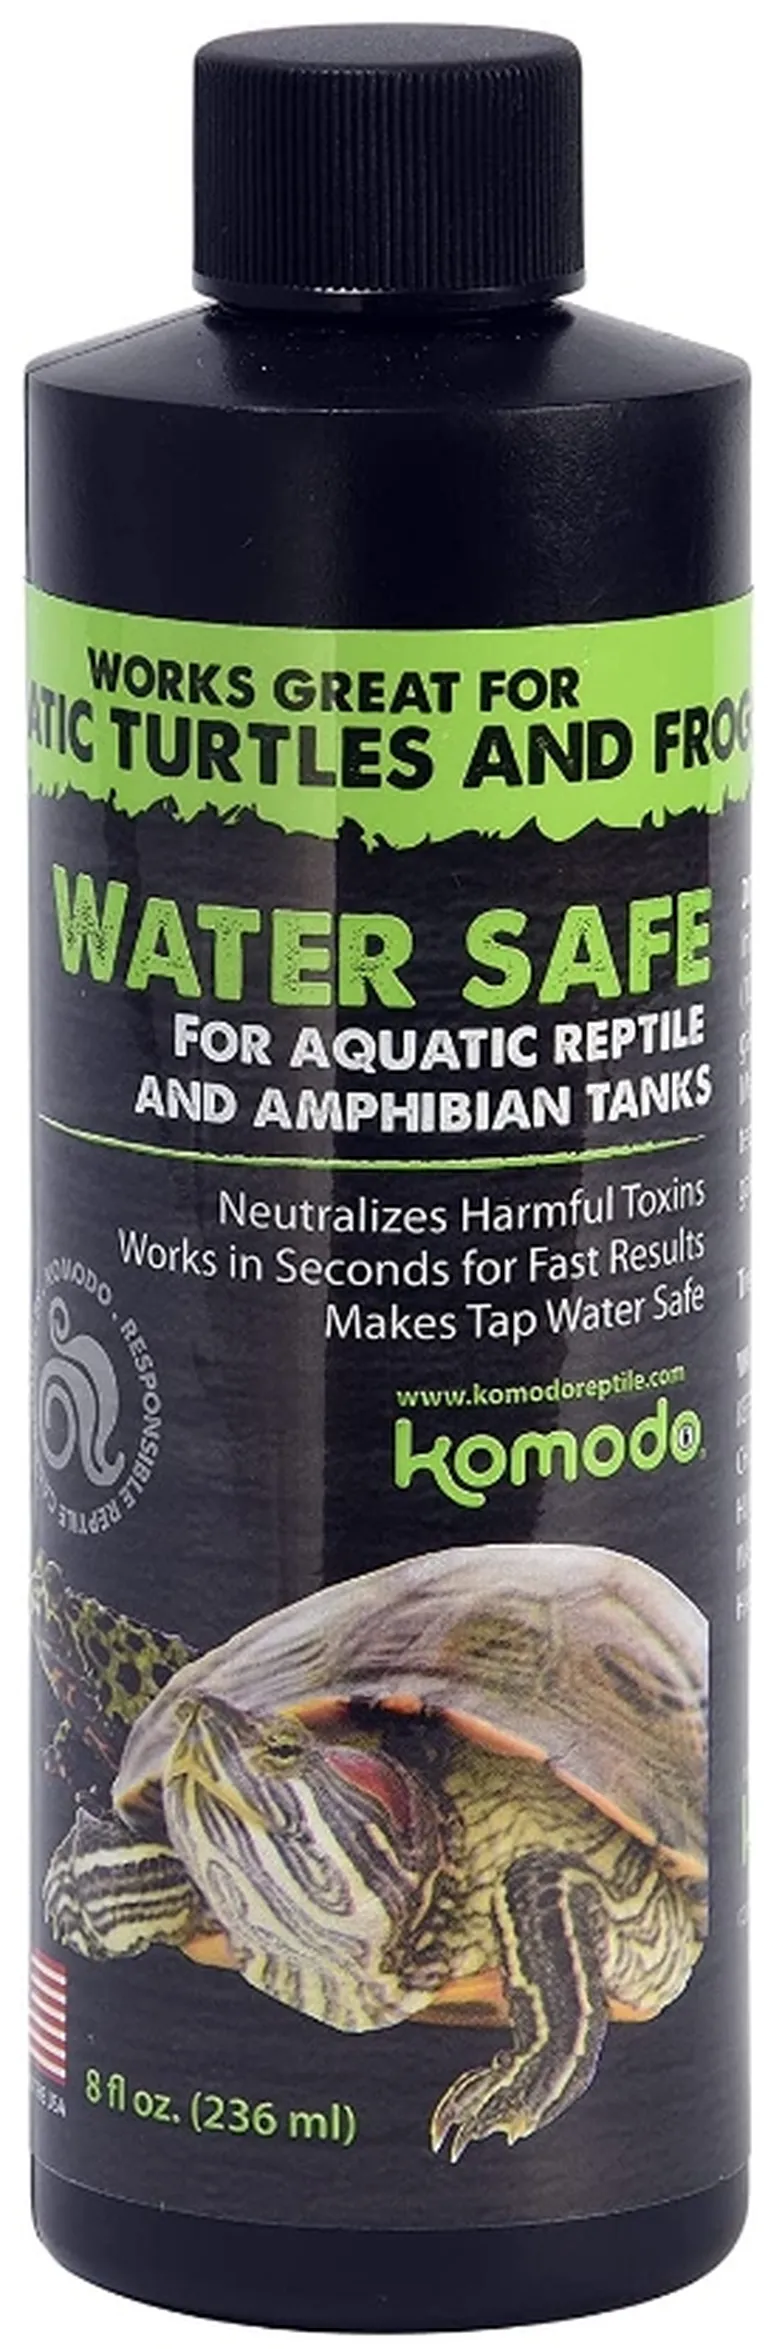 Komodo Water Safe Conditioner for Aquatic Reptiles and Amphibians Photo 1